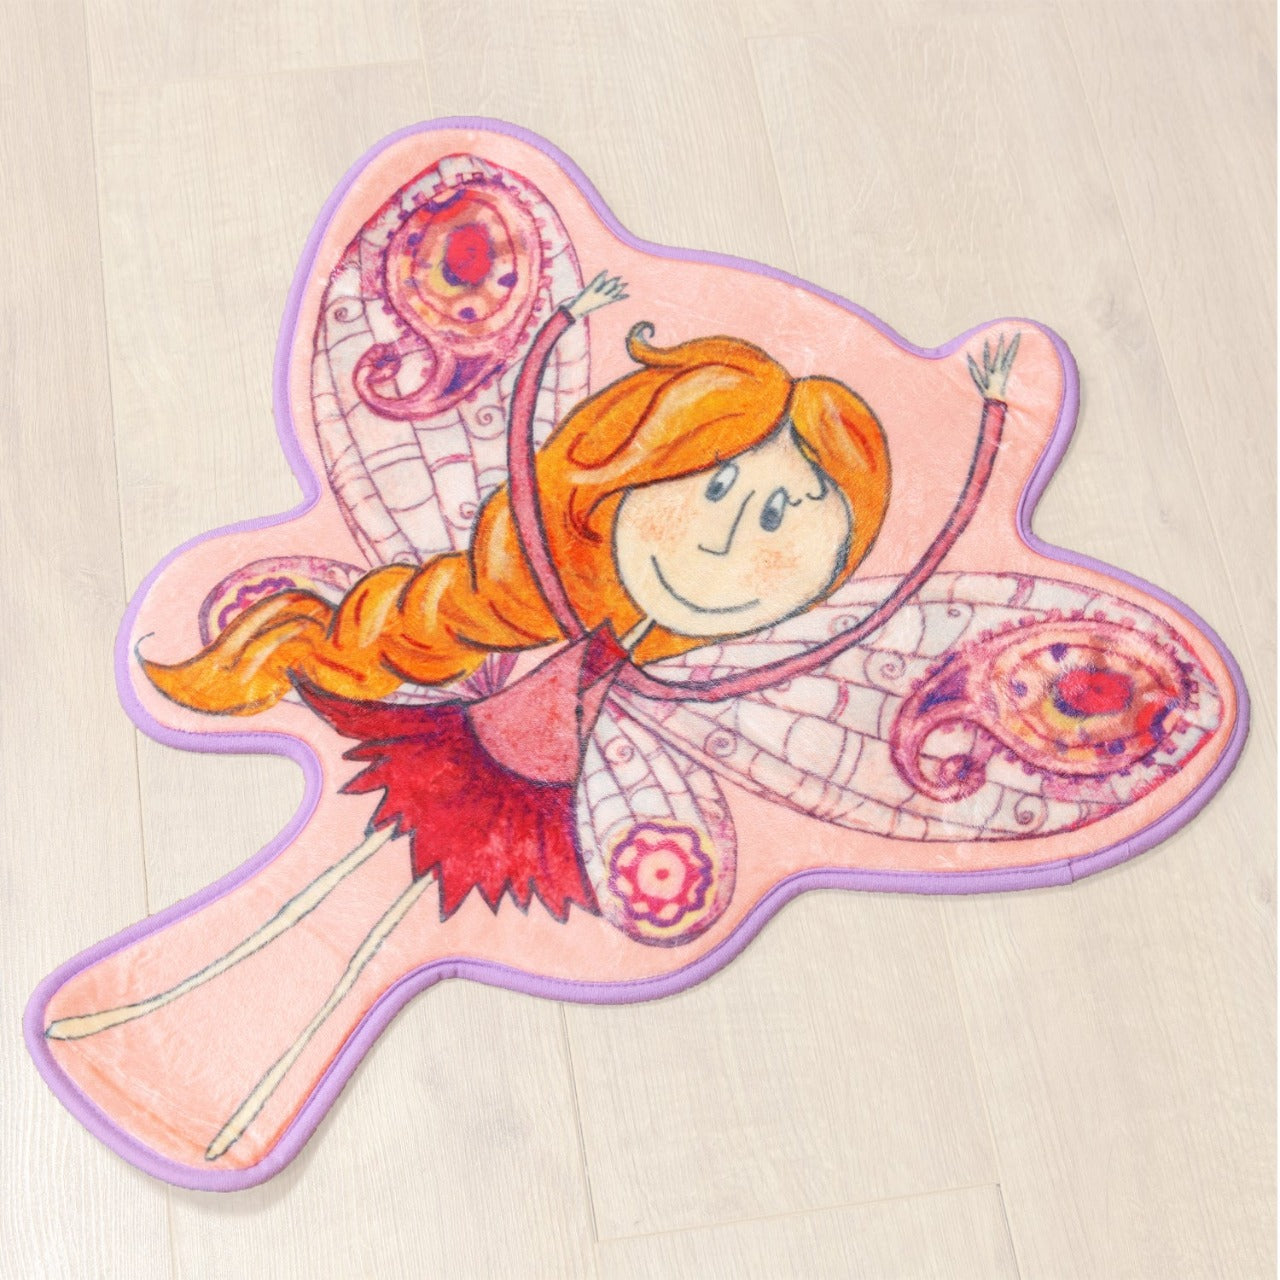 Magical Fairy Bedroom Rug 60 x 68 cm  Bring some fairy magic to their bedroom with this cushioned pink fairy rug. From the My Magical Fairy Collection by Just 4 Kids - some adults don't believe in fairies, but we know better, don't we...